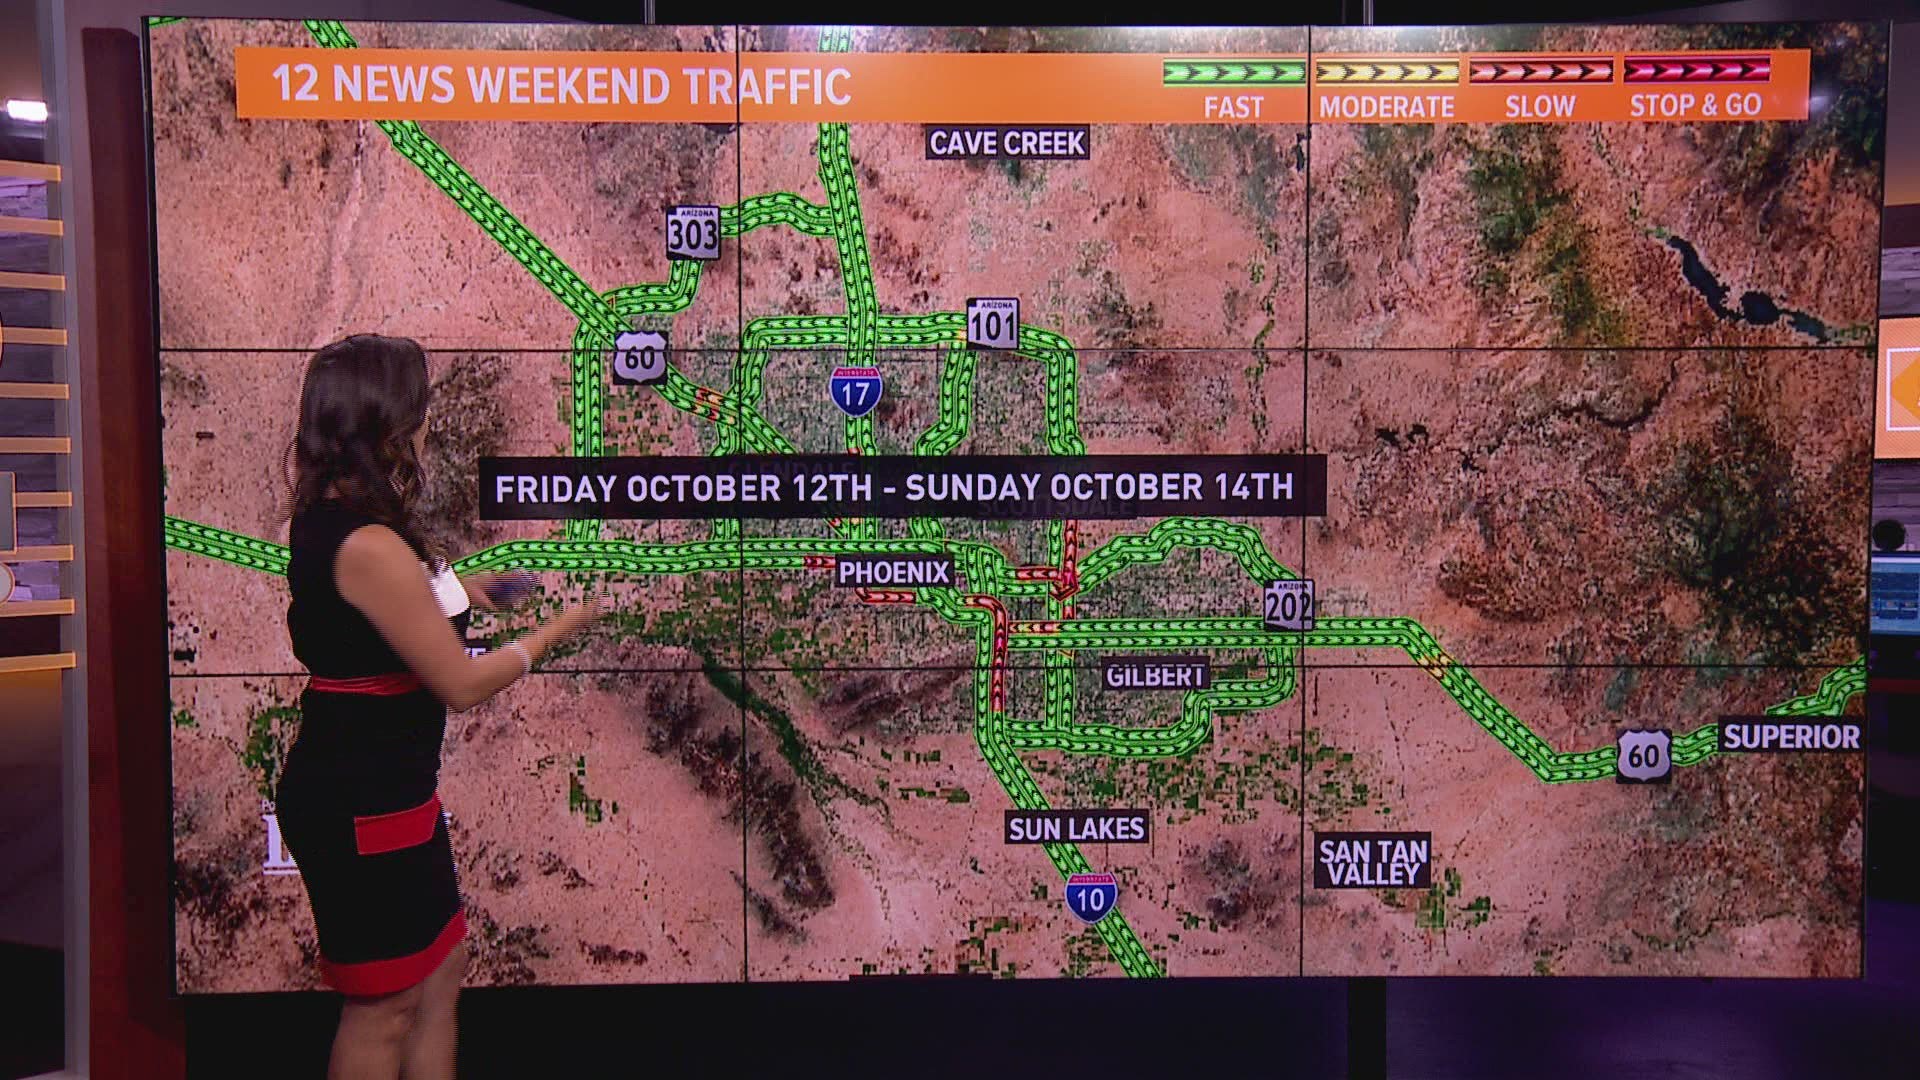 Here's your weekend traffic outlook for October 12 - October 14